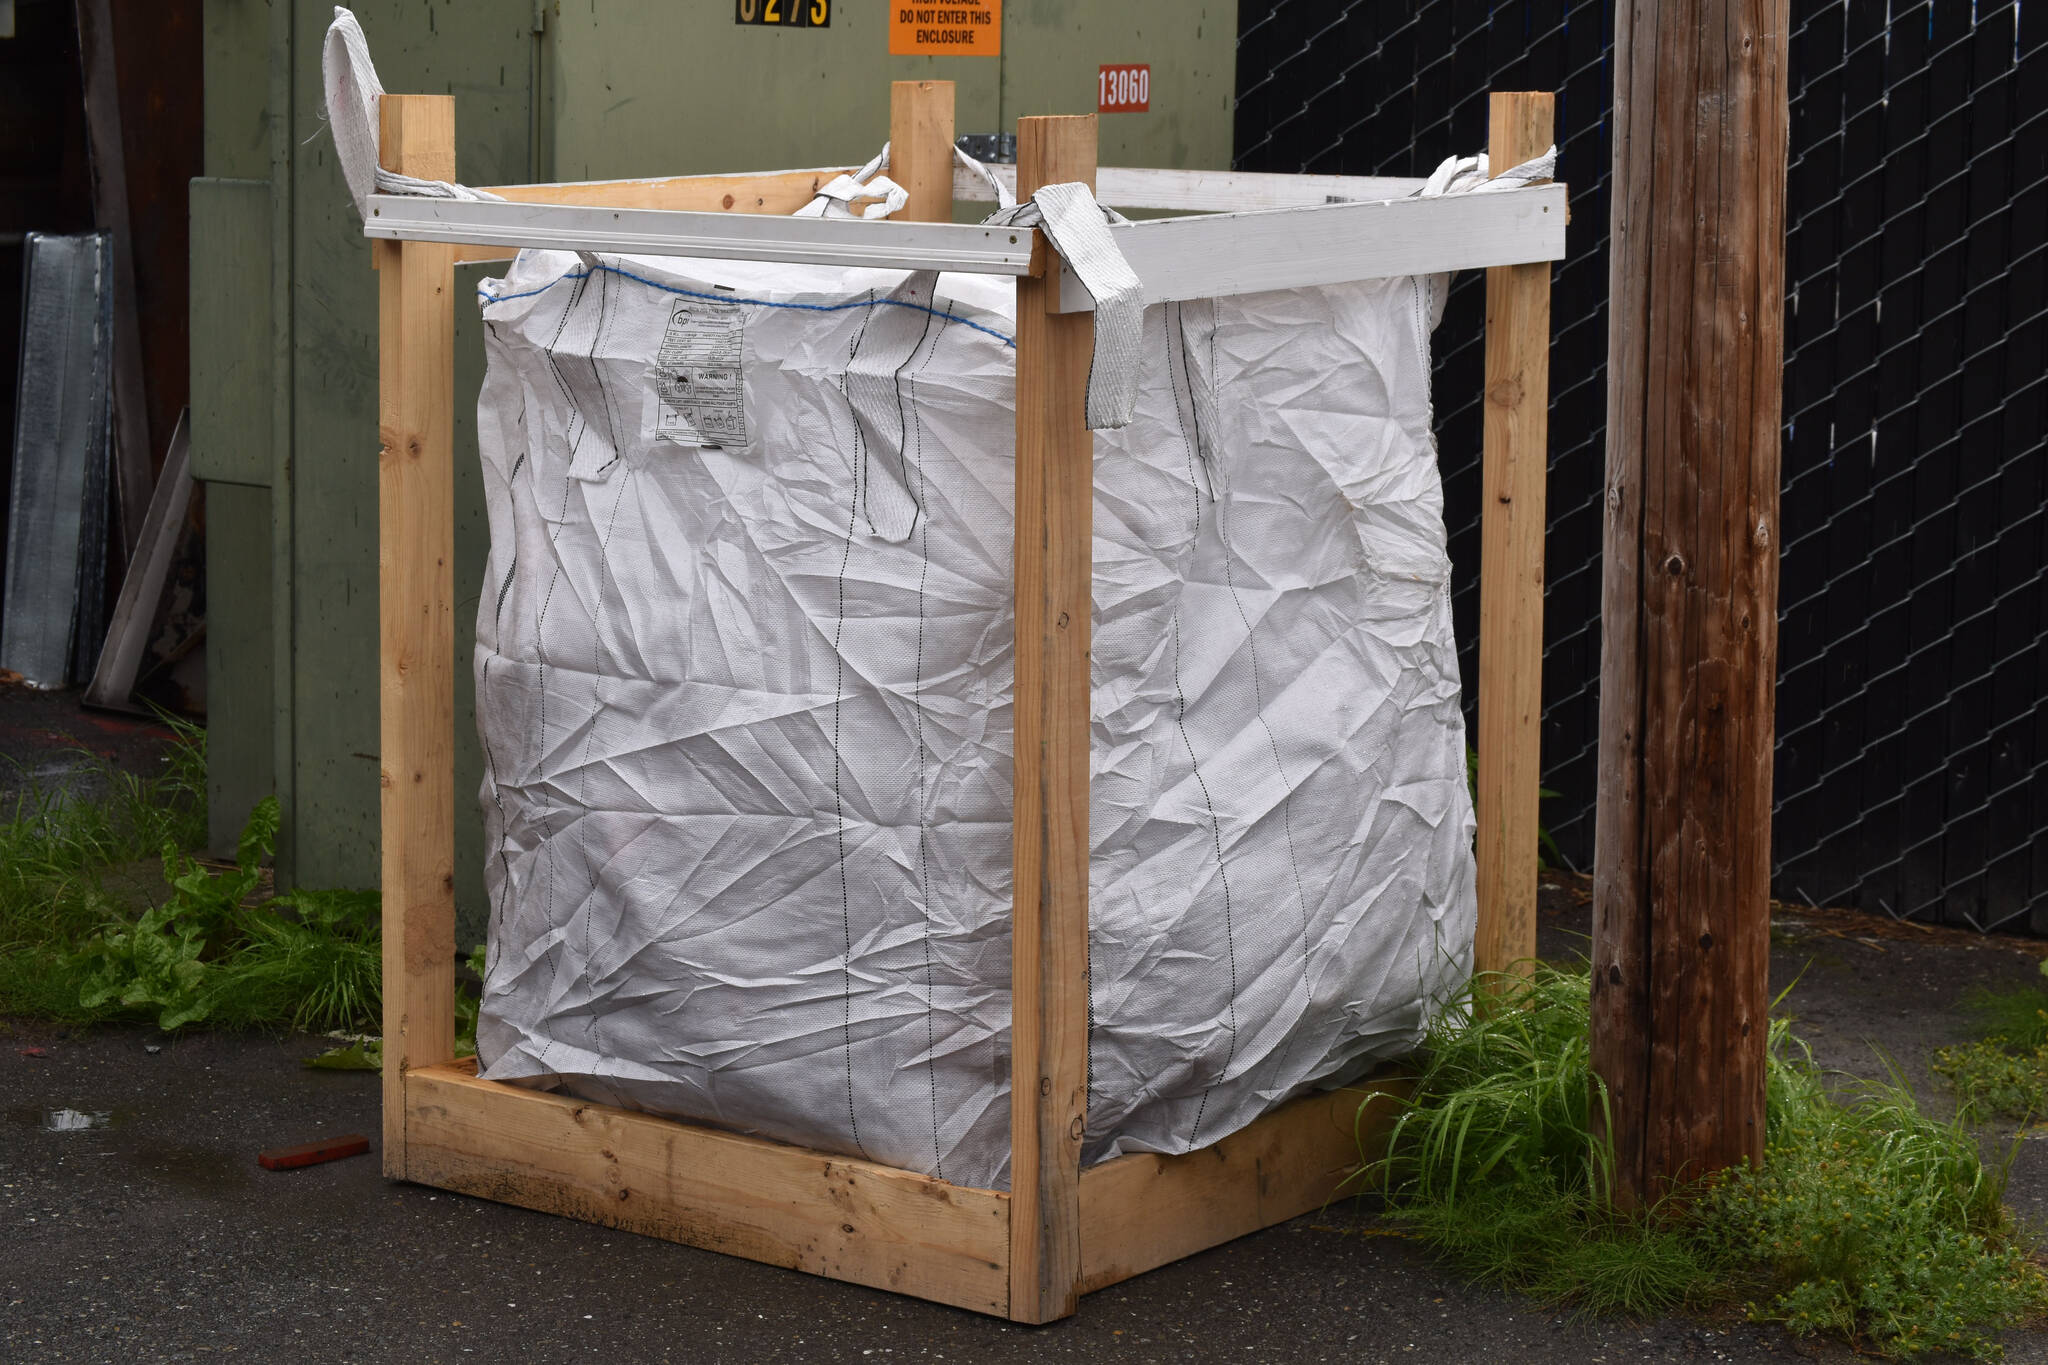 A recycling super sack behind The Goods + Sustainable Grocery in Soldotna, Alaska, on Aug. 11, 2022. (Jake Dye/Peninsula Clarion)